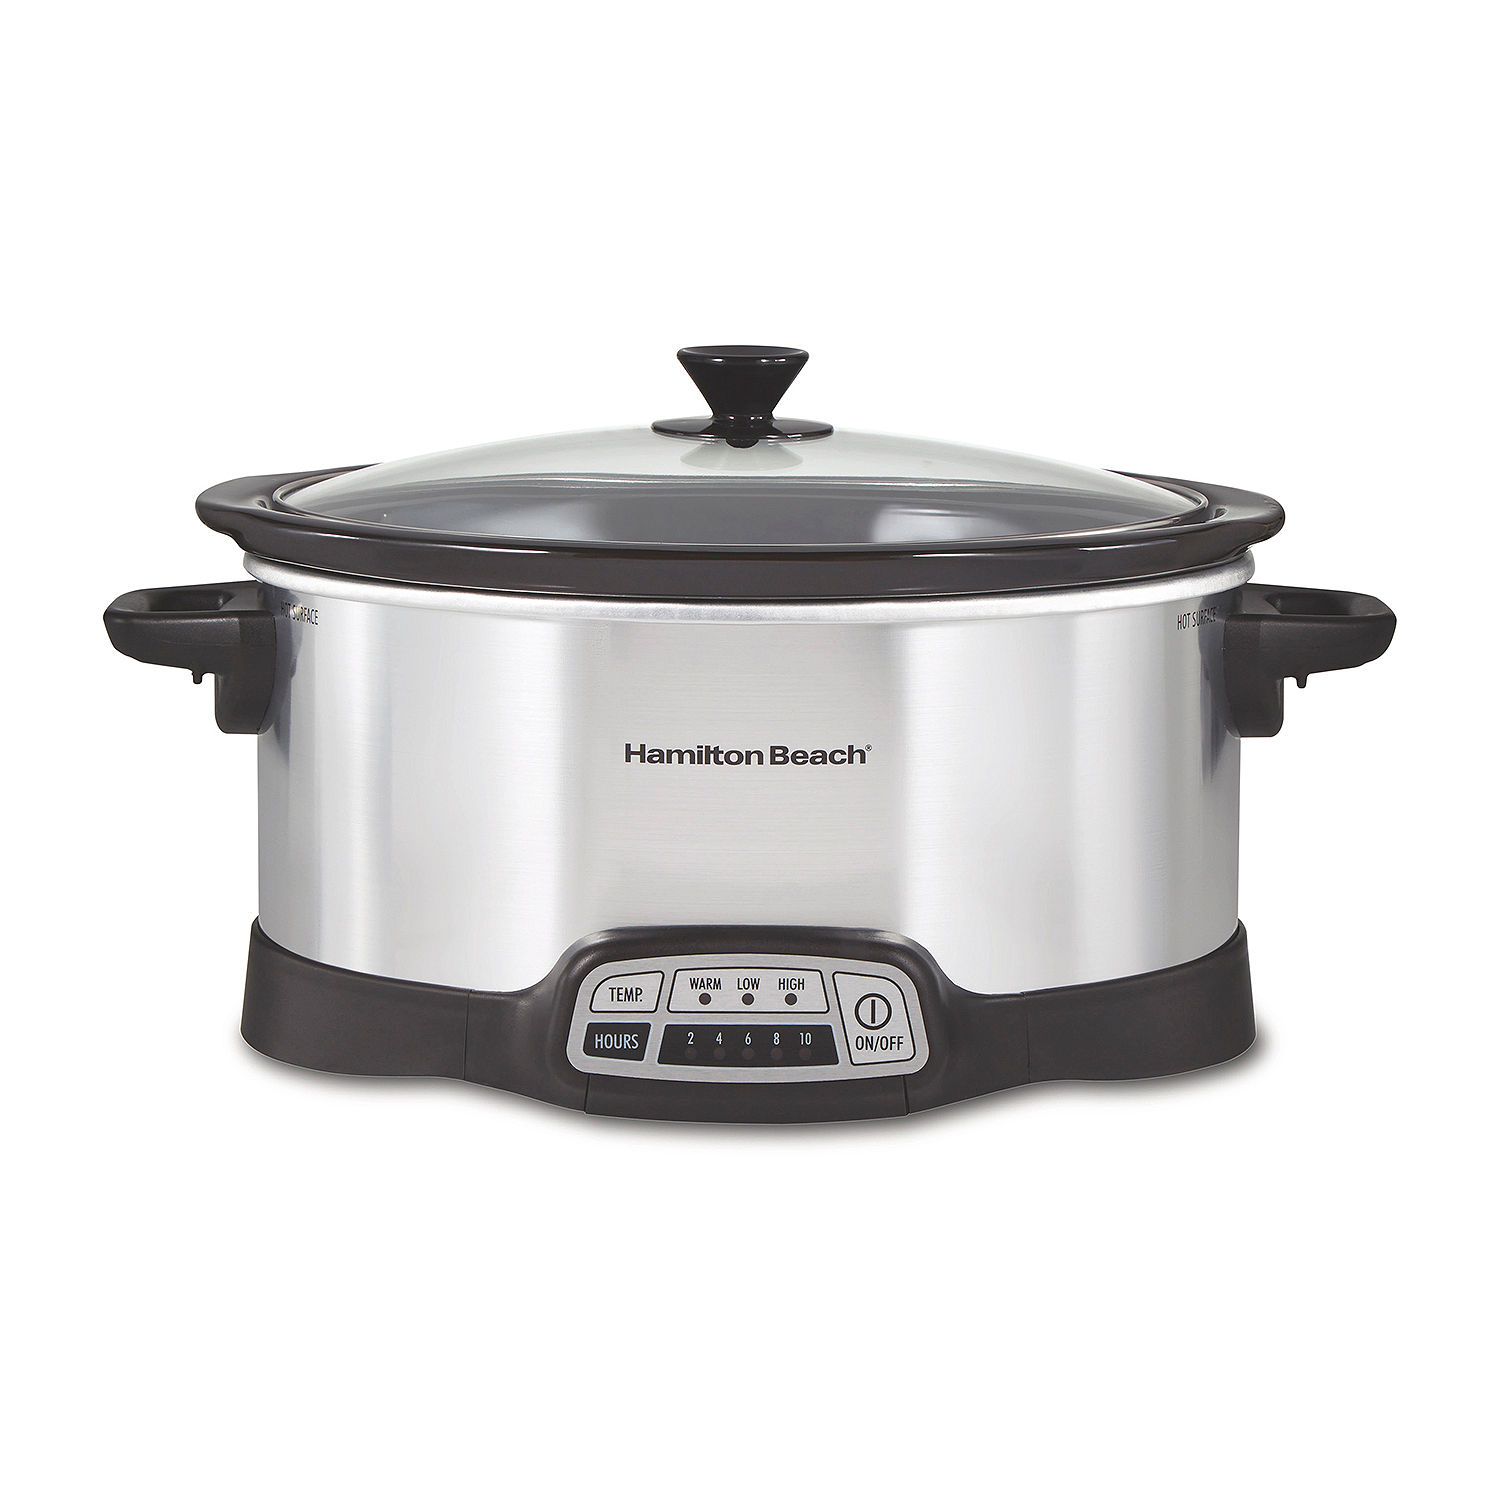 Hamilton Beach Programmable Slow Cooker-JCPenney, Color: Silver